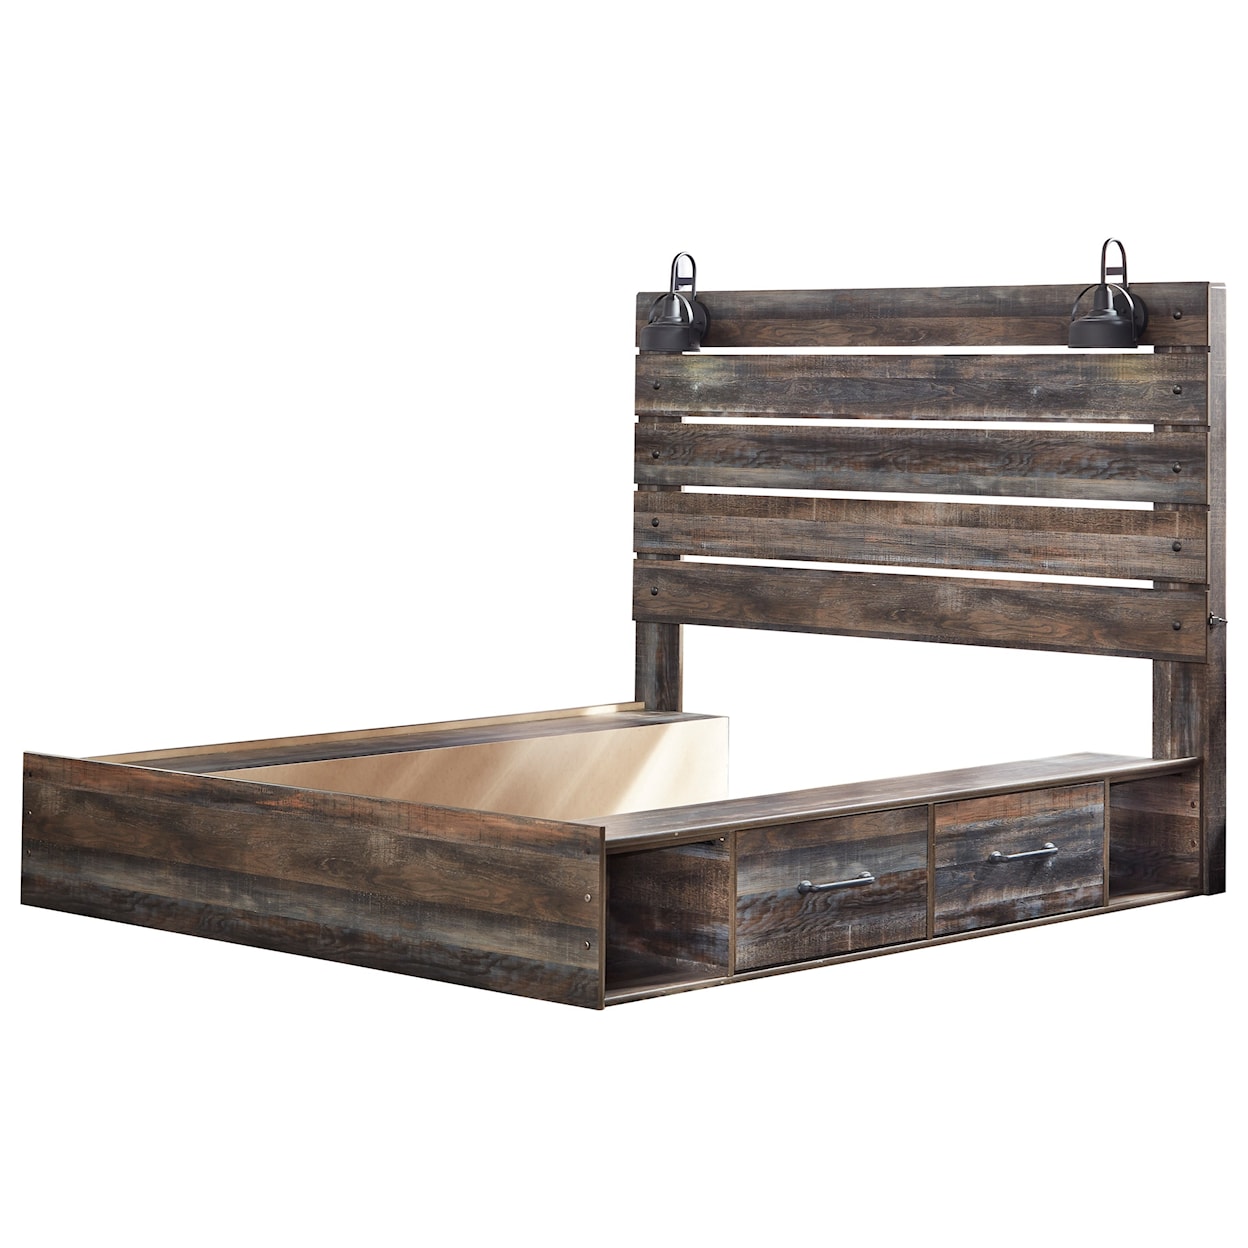 Signature Design by Ashley Baleigh King Panel Bed with Double Underbed Storage